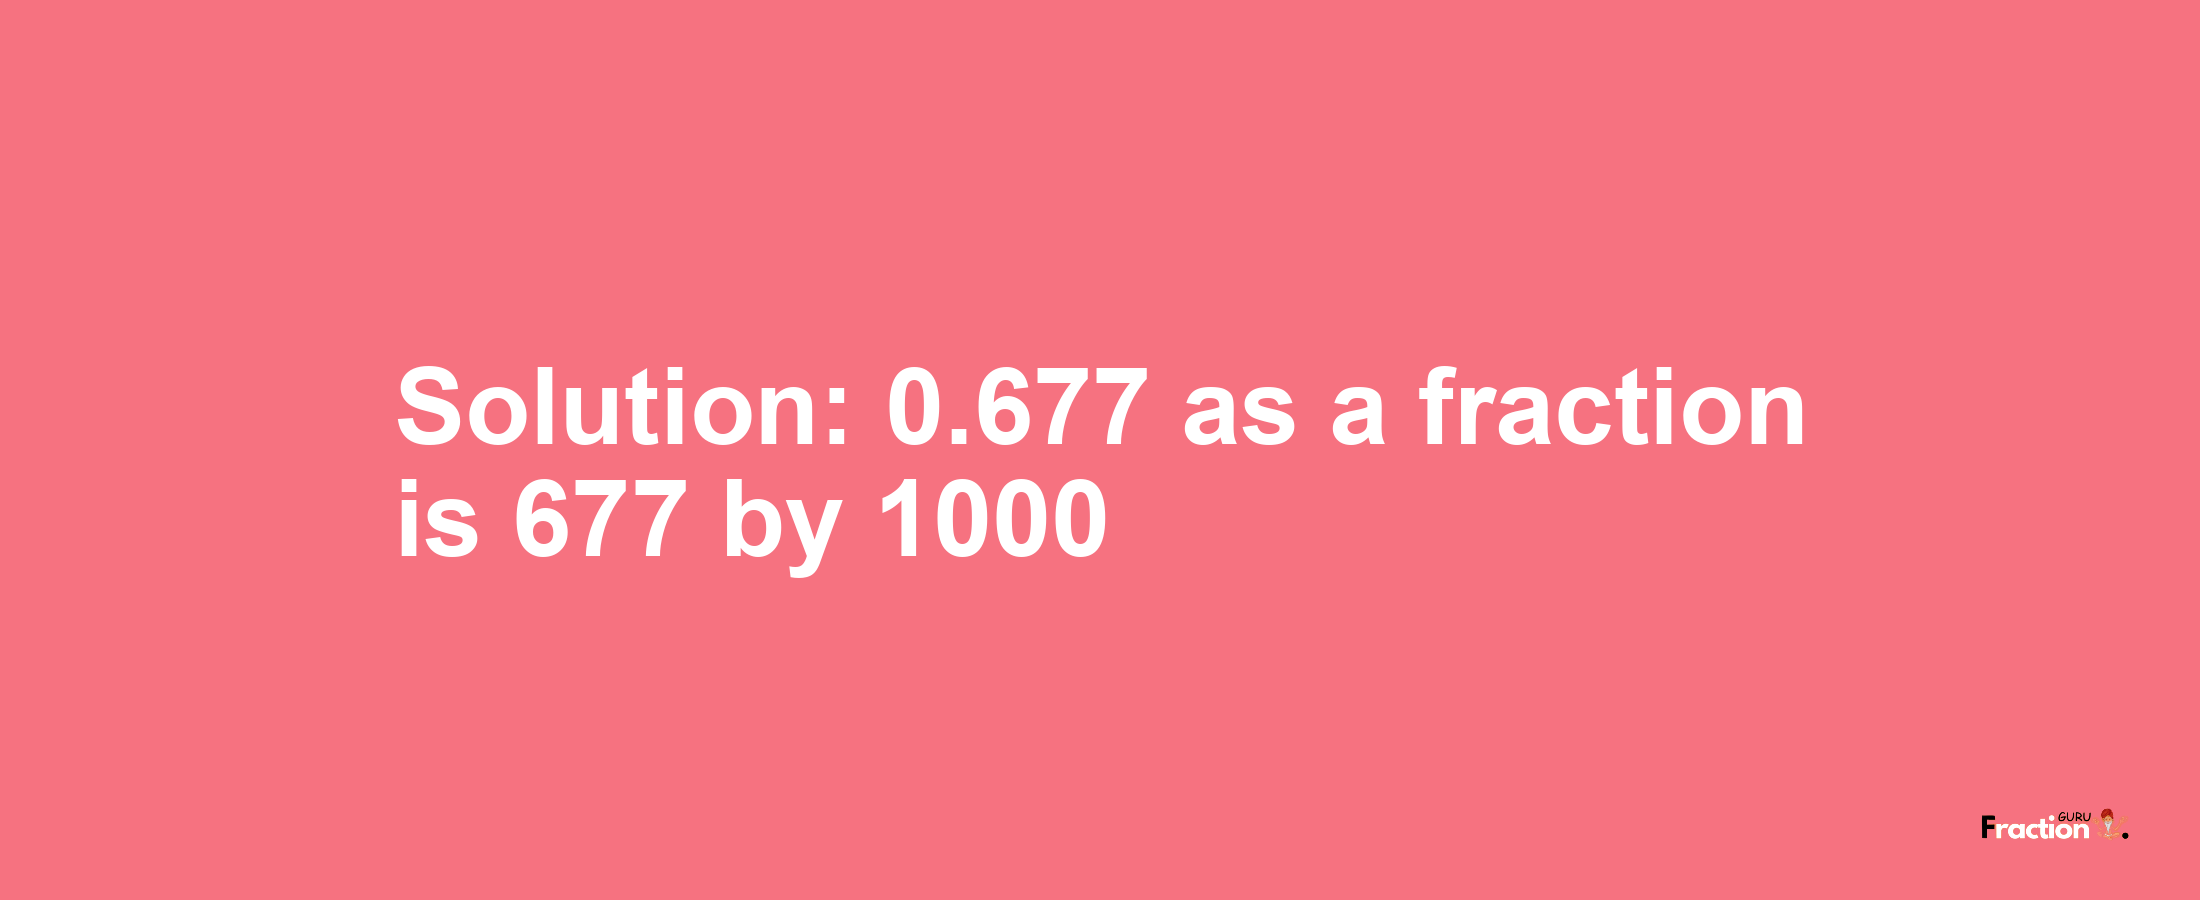 Solution:0.677 as a fraction is 677/1000